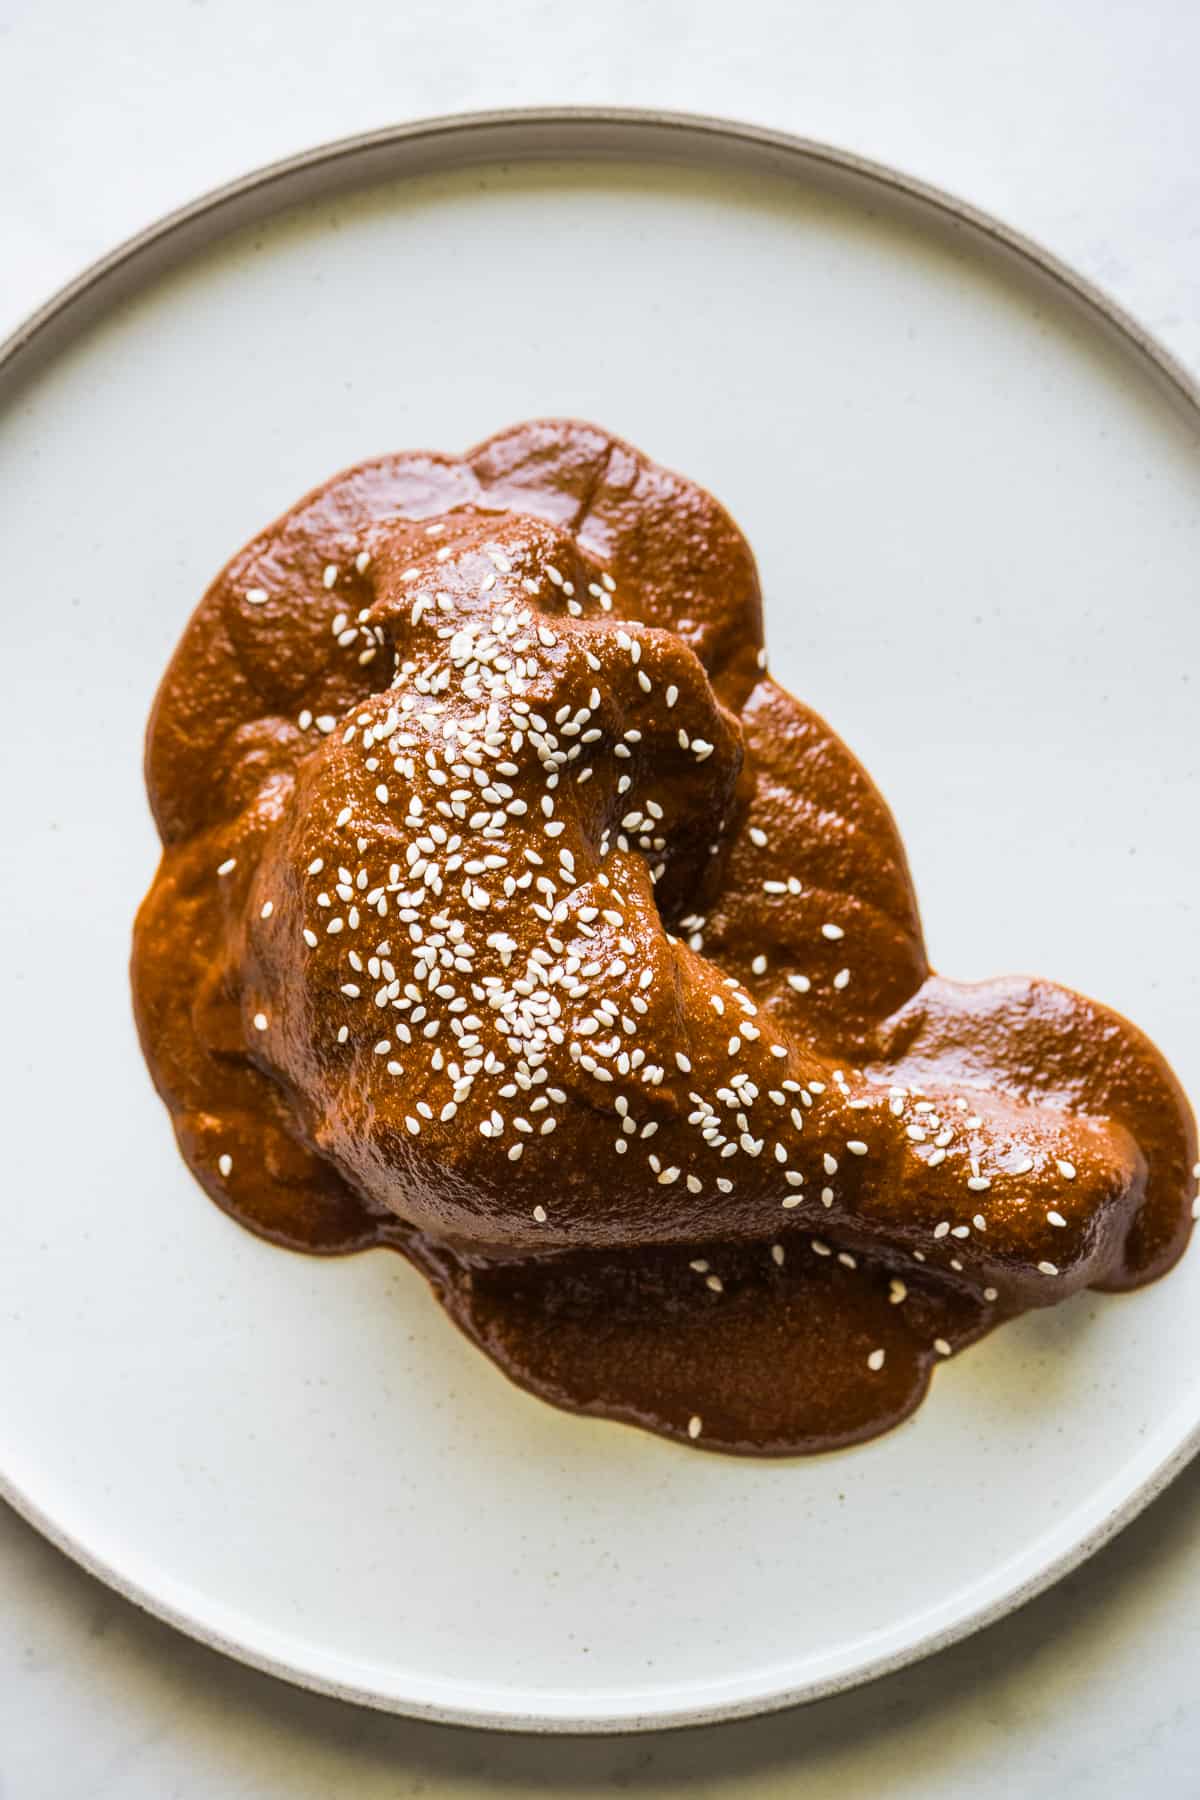 Mole sauce, or mole poblano, on a chicken leg and garnished with sesame seeds.